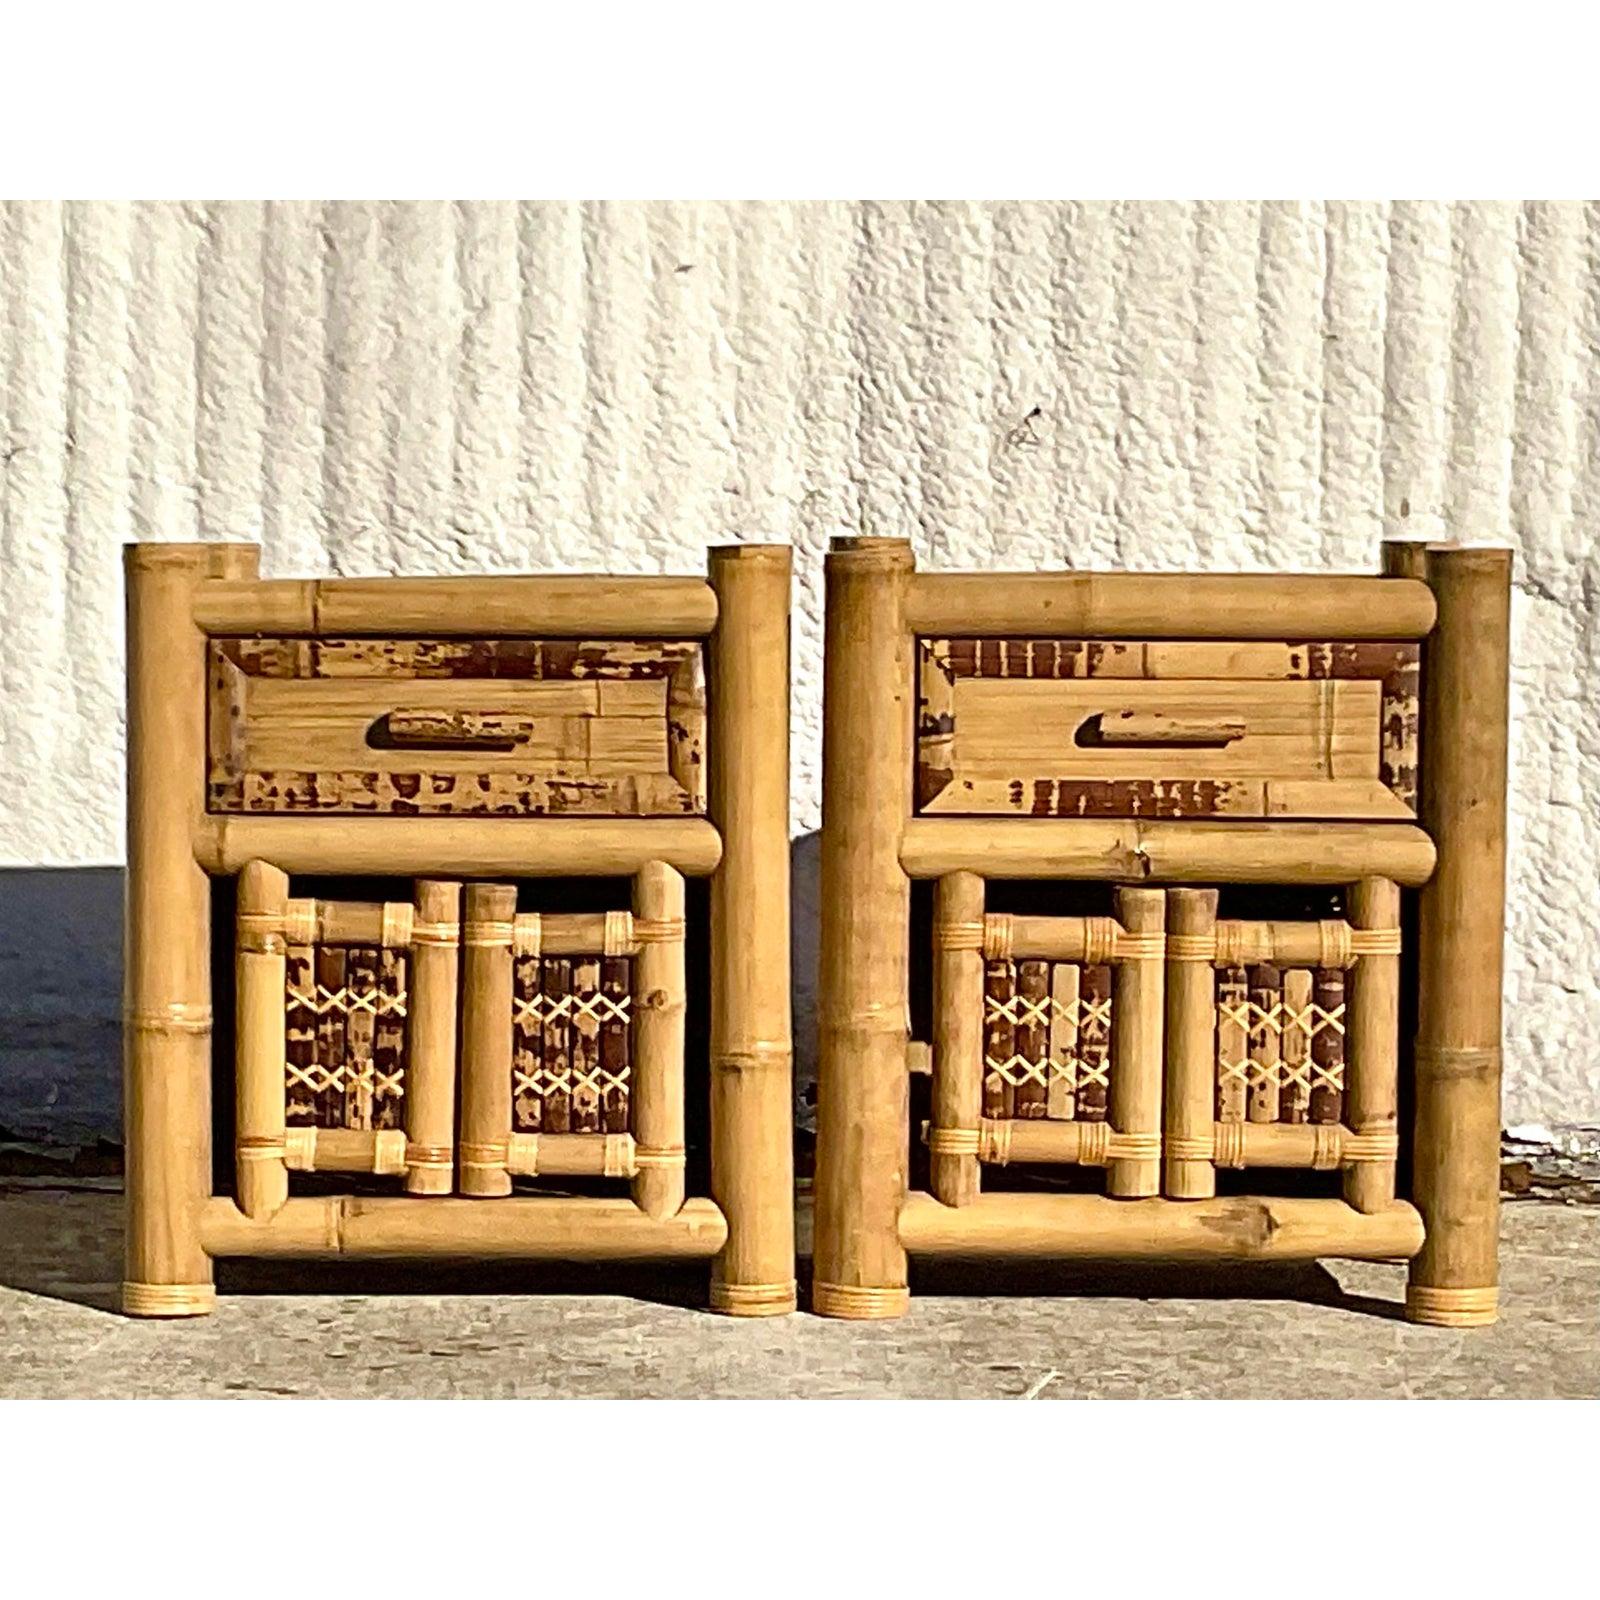 A fabulous pair of vintage Coastal nightstands. A chic elephant bamboo frame with inset split bamboo panels. Charming and dramatic. Acquired from a Palm Beach estate.